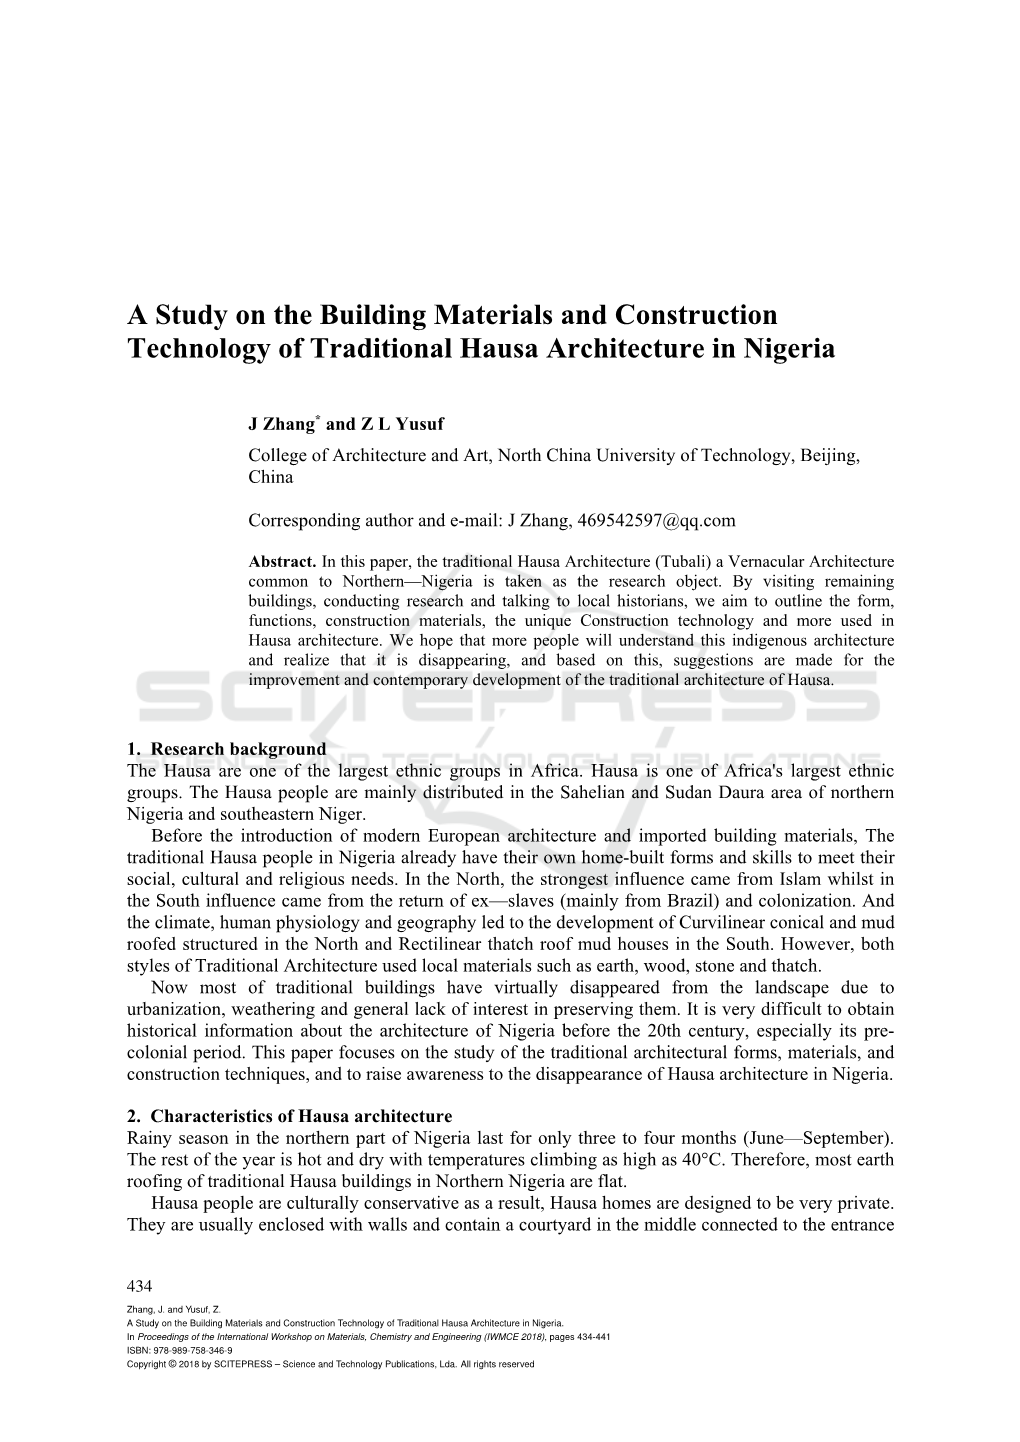 A Study on the Building Materials and Construction Technology of Traditional Hausa Architecture in Nigeria